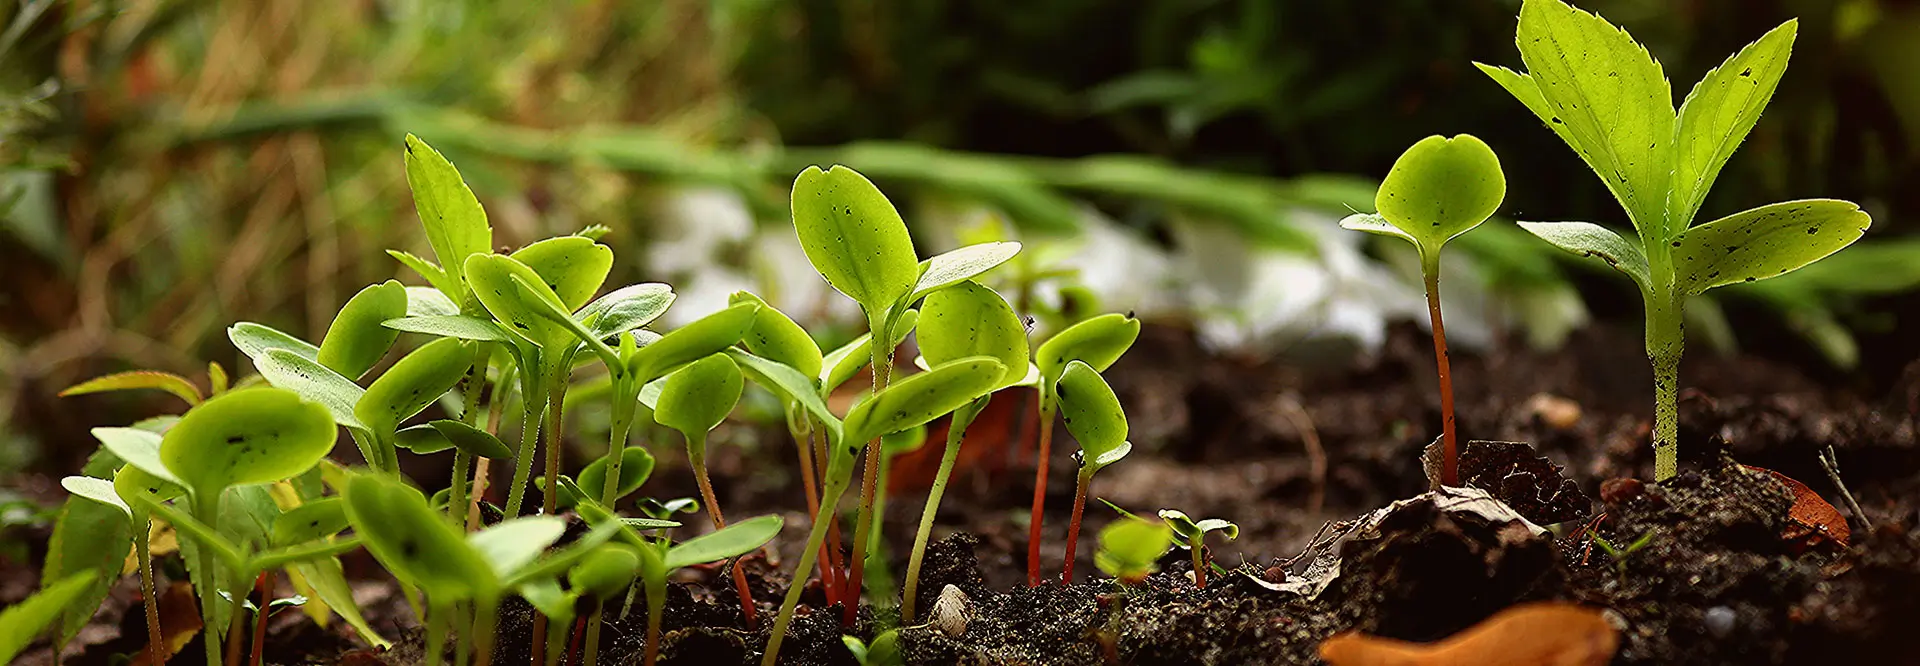 Plant germination in soil with light